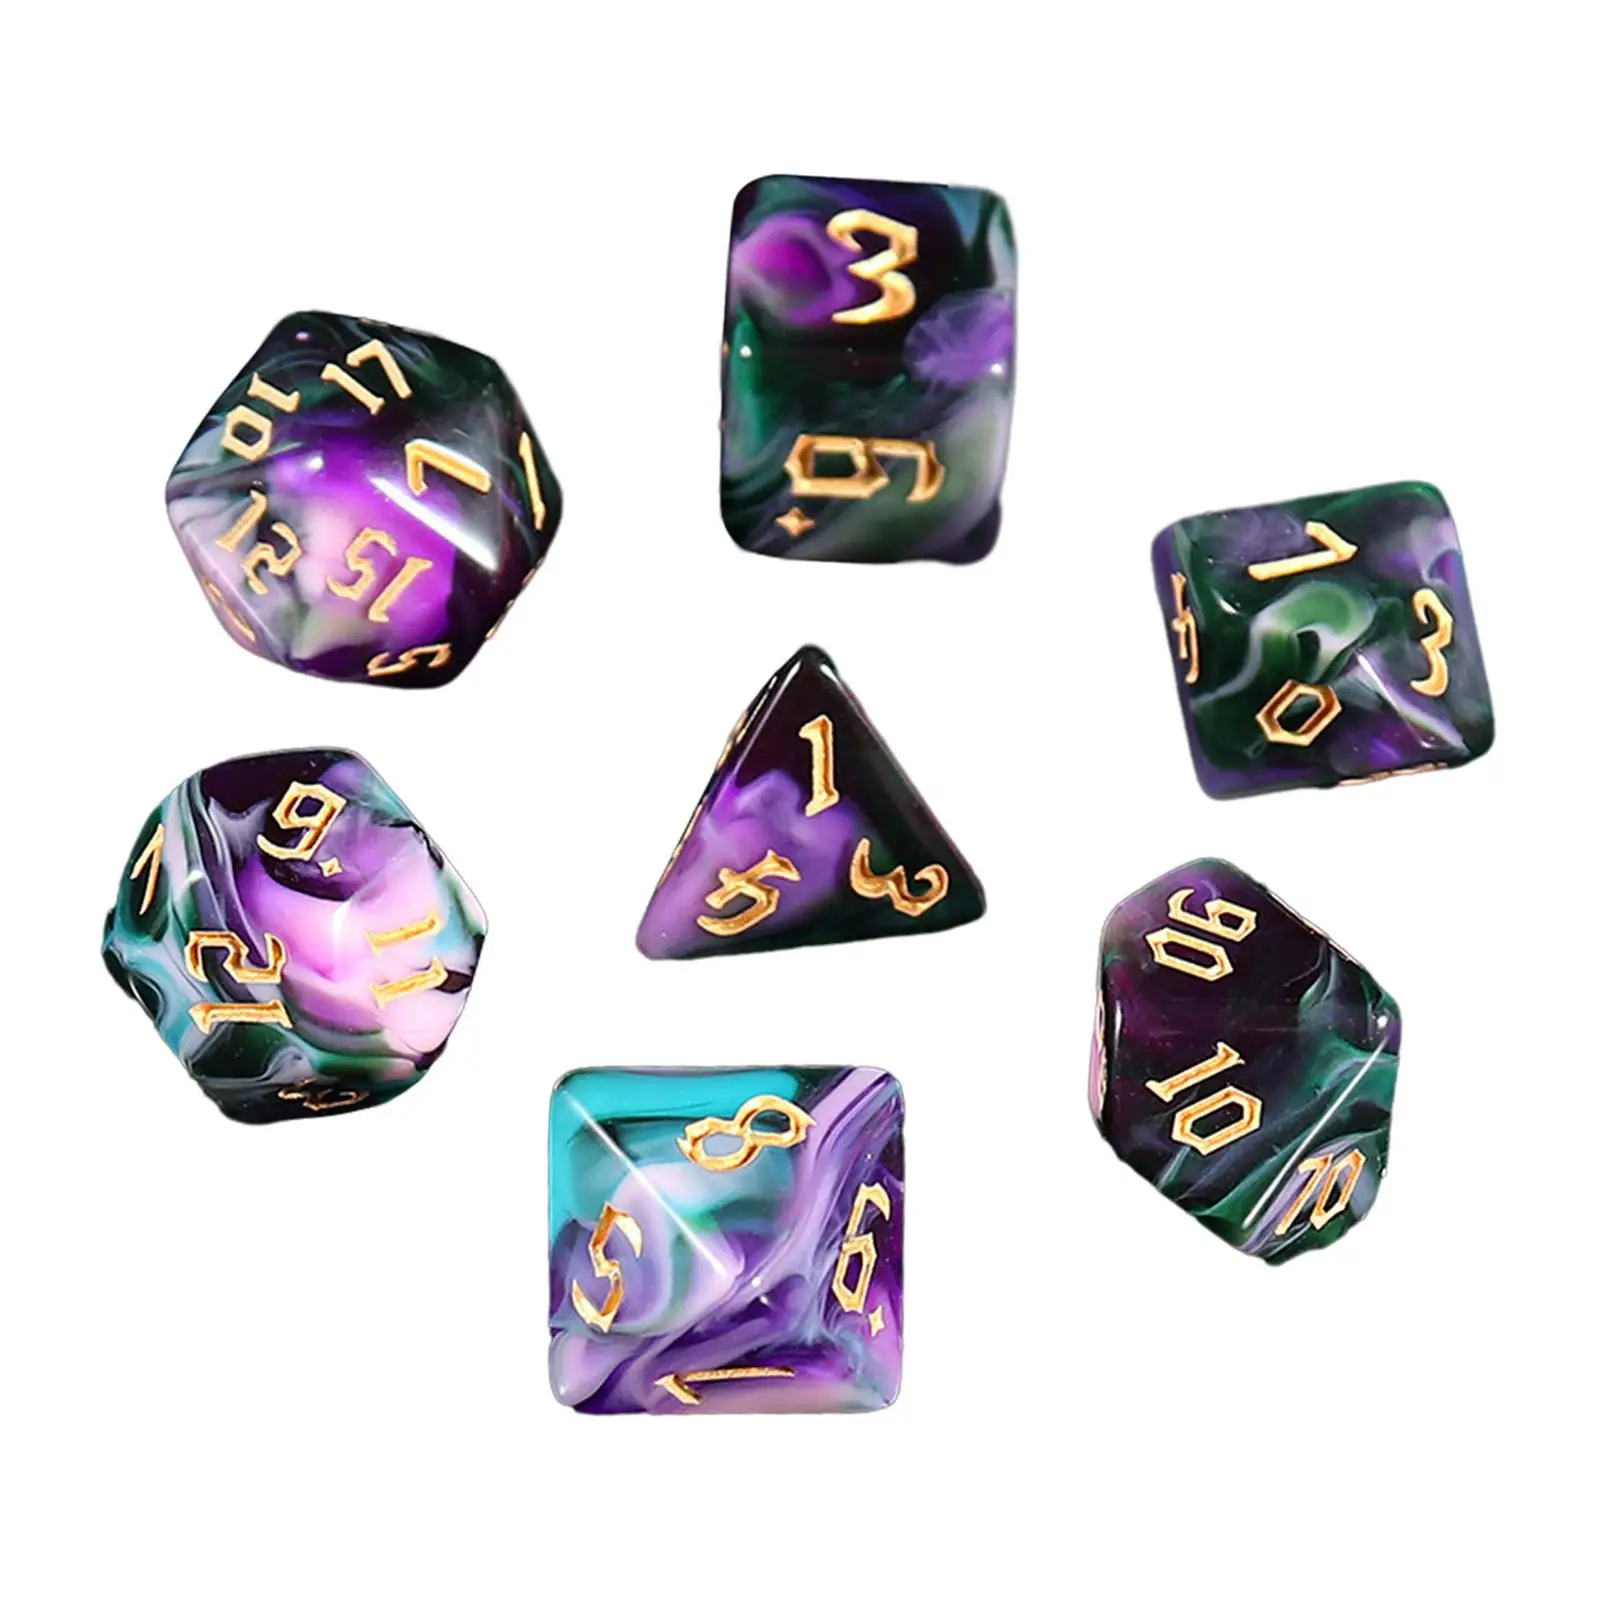 7 Pieces D4-d20 Dices Table Games Party Toys Acrylic Dices Multi Sided Dices for RPG Role Playing Card Games Math Teaching